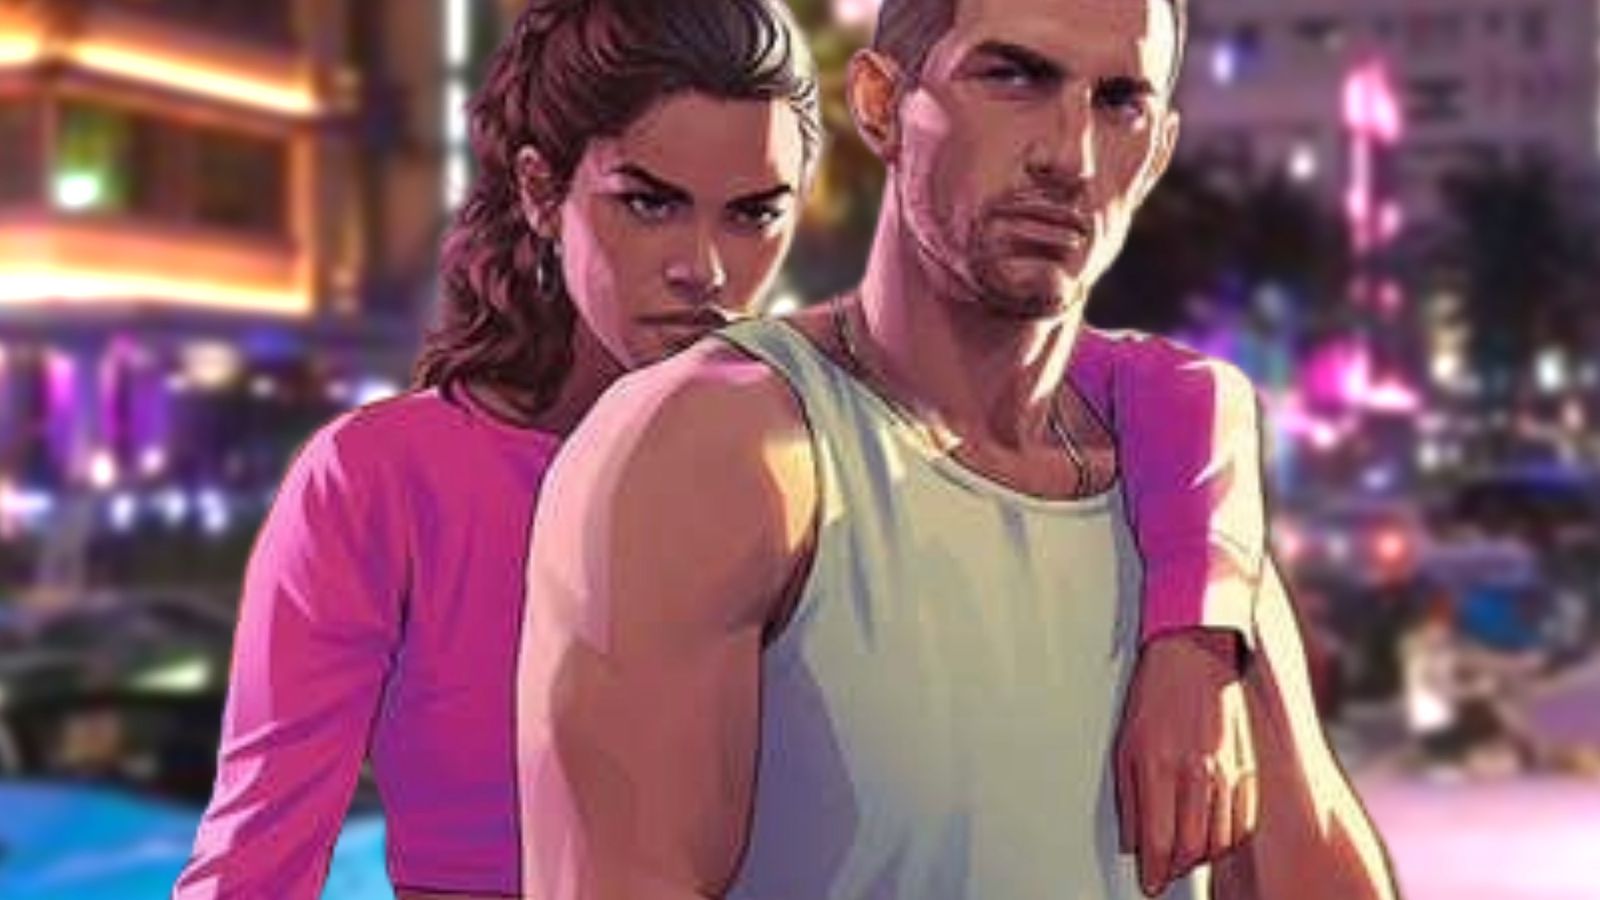 GTA 6 release window confirmed - the two protagonists standing in front of a busy Vice City street 